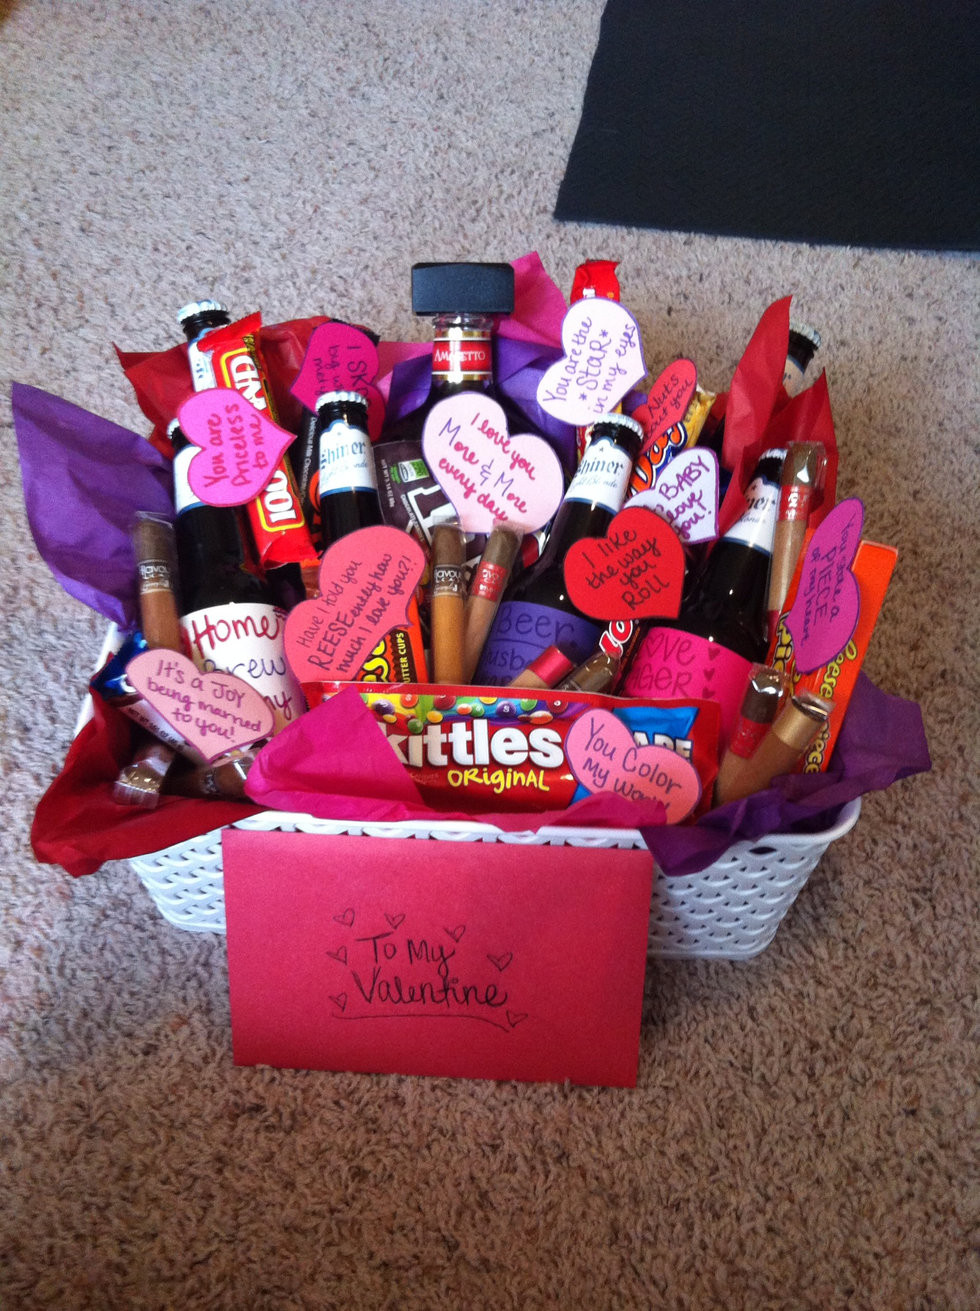 Cute Gift Basket Ideas For Girlfriend
 6 Things You Should Be Getting Your Boo Valentine s Day